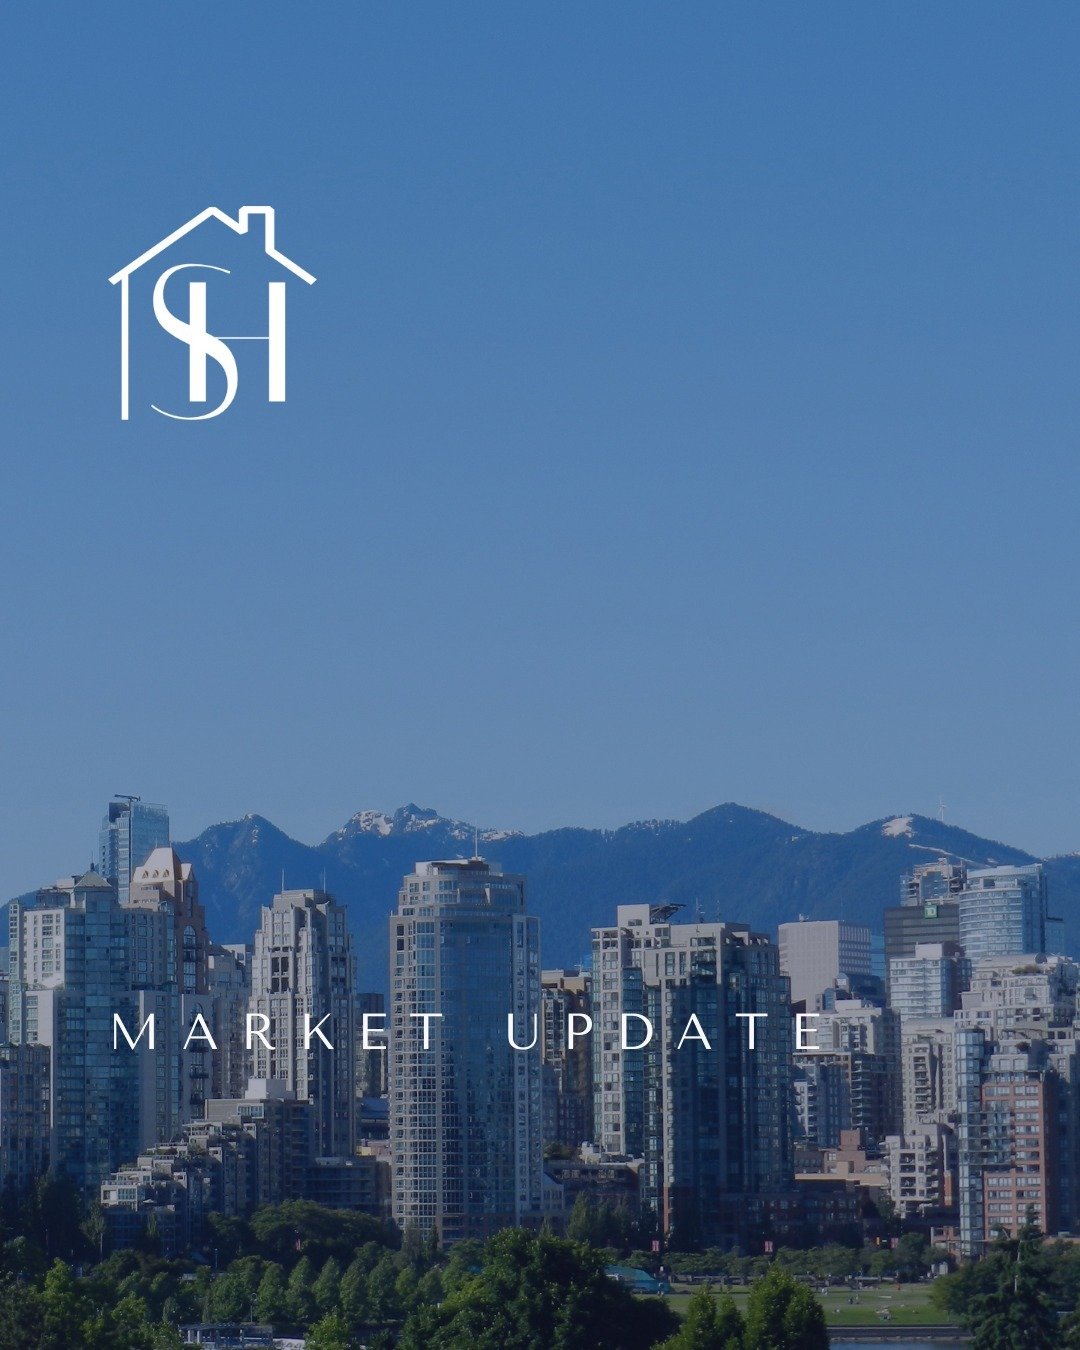 MARKET UPDATE! Inventory reaches highest level since the pandemic summer of 2020. ⤵️⁠
⁠
&quot;It&rsquo;s a feat to see inventory finally climb above 12,000. Many were predicting higher inventory levels would materialize quickly when the Bank of Canad